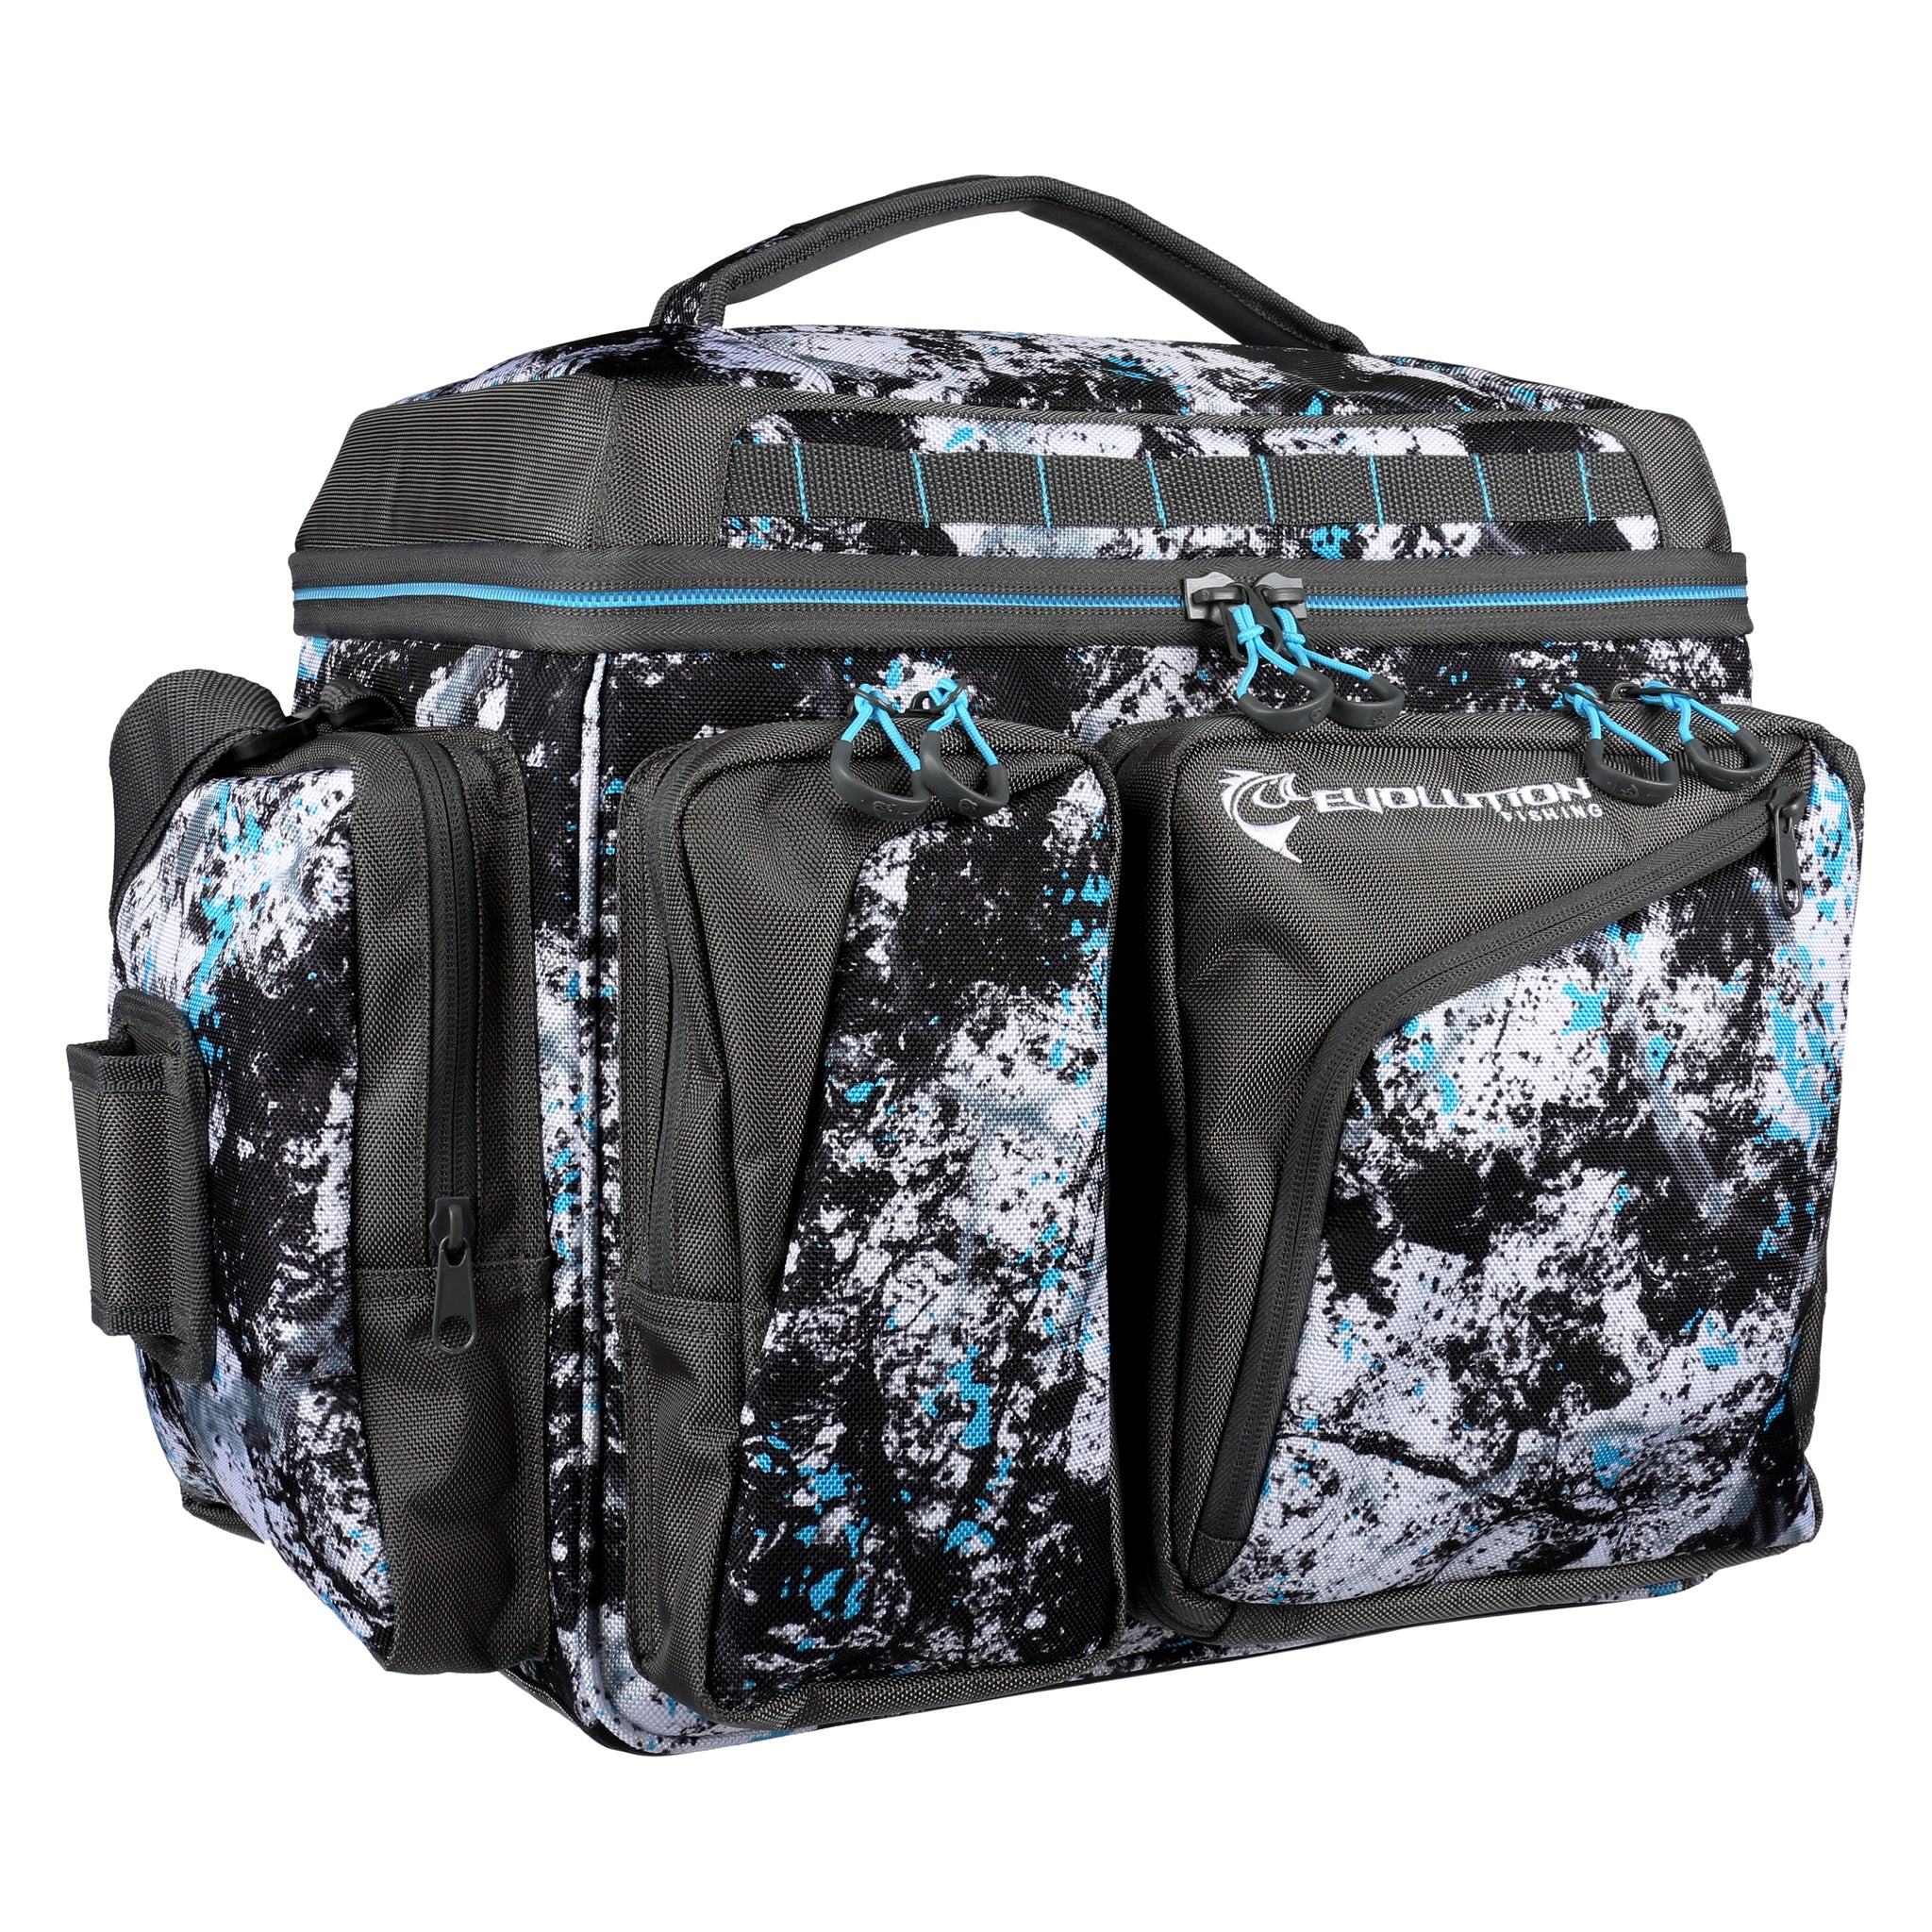 Evolution Drift Series Topless Vertical 3700 Tackle Bag (Initial Review) 